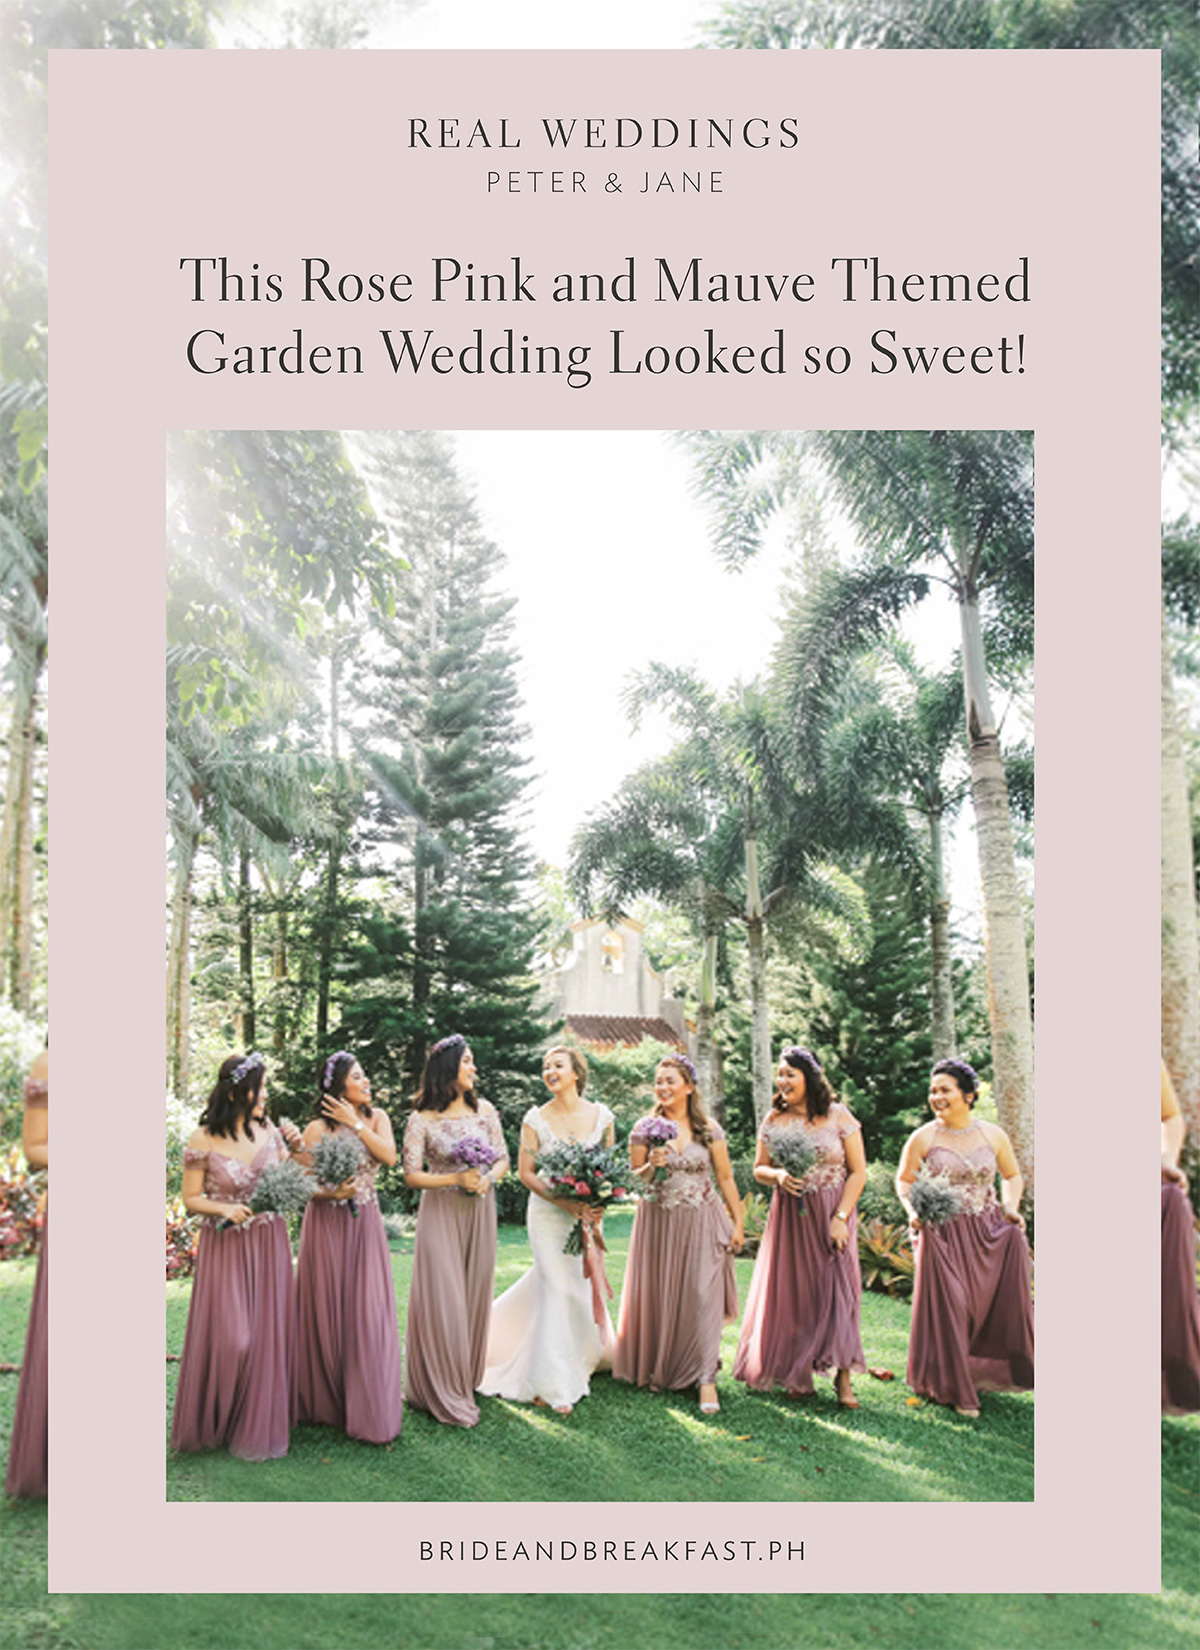 This Rose Pink and Mauve Themed Garden Wedding Looked so Sweet!